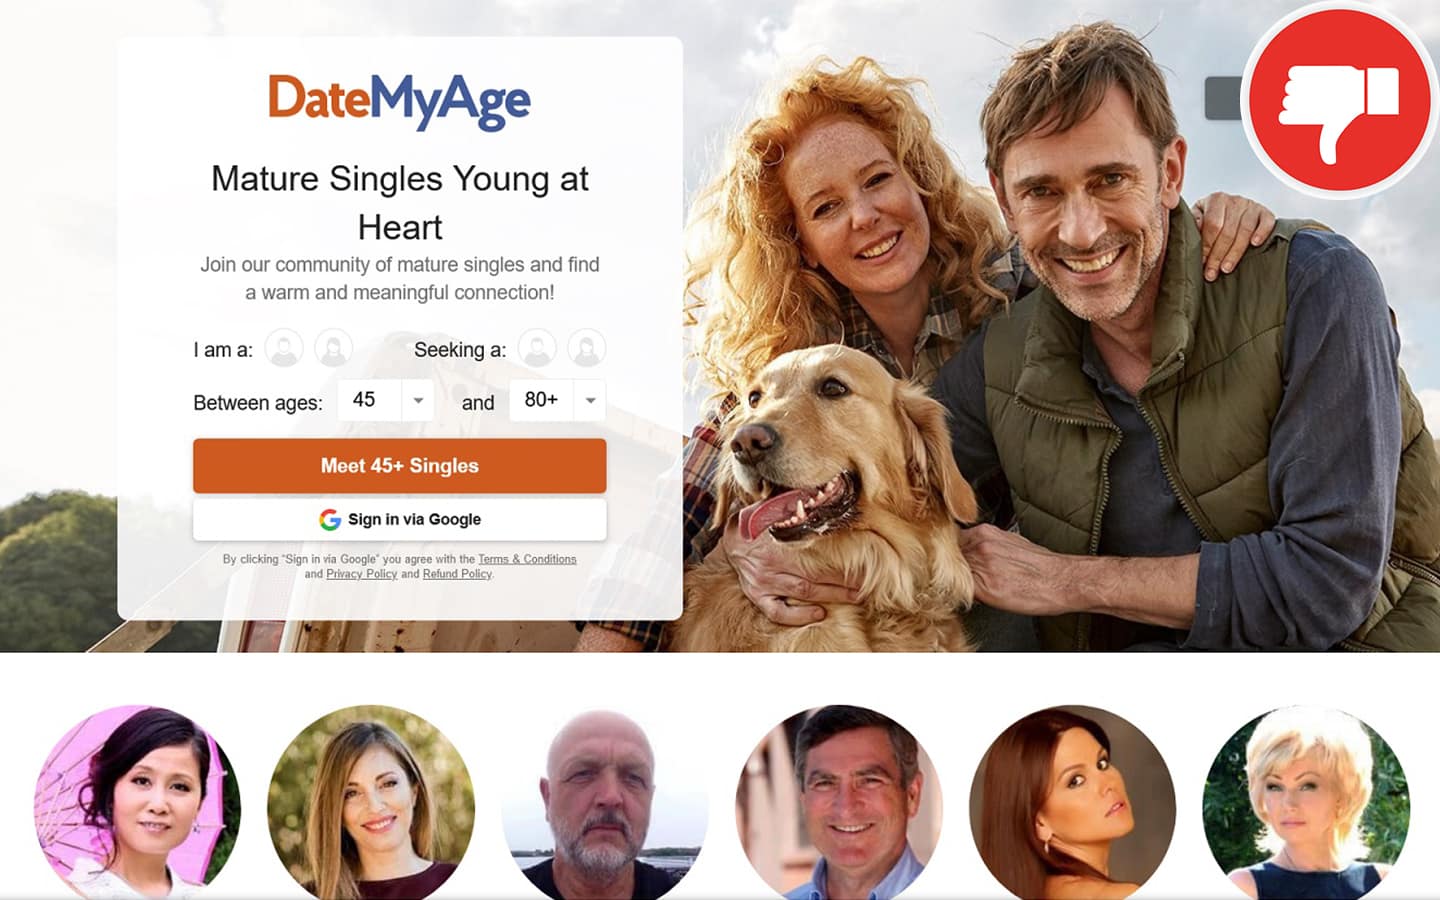 Review DateMyAge.com scam experience